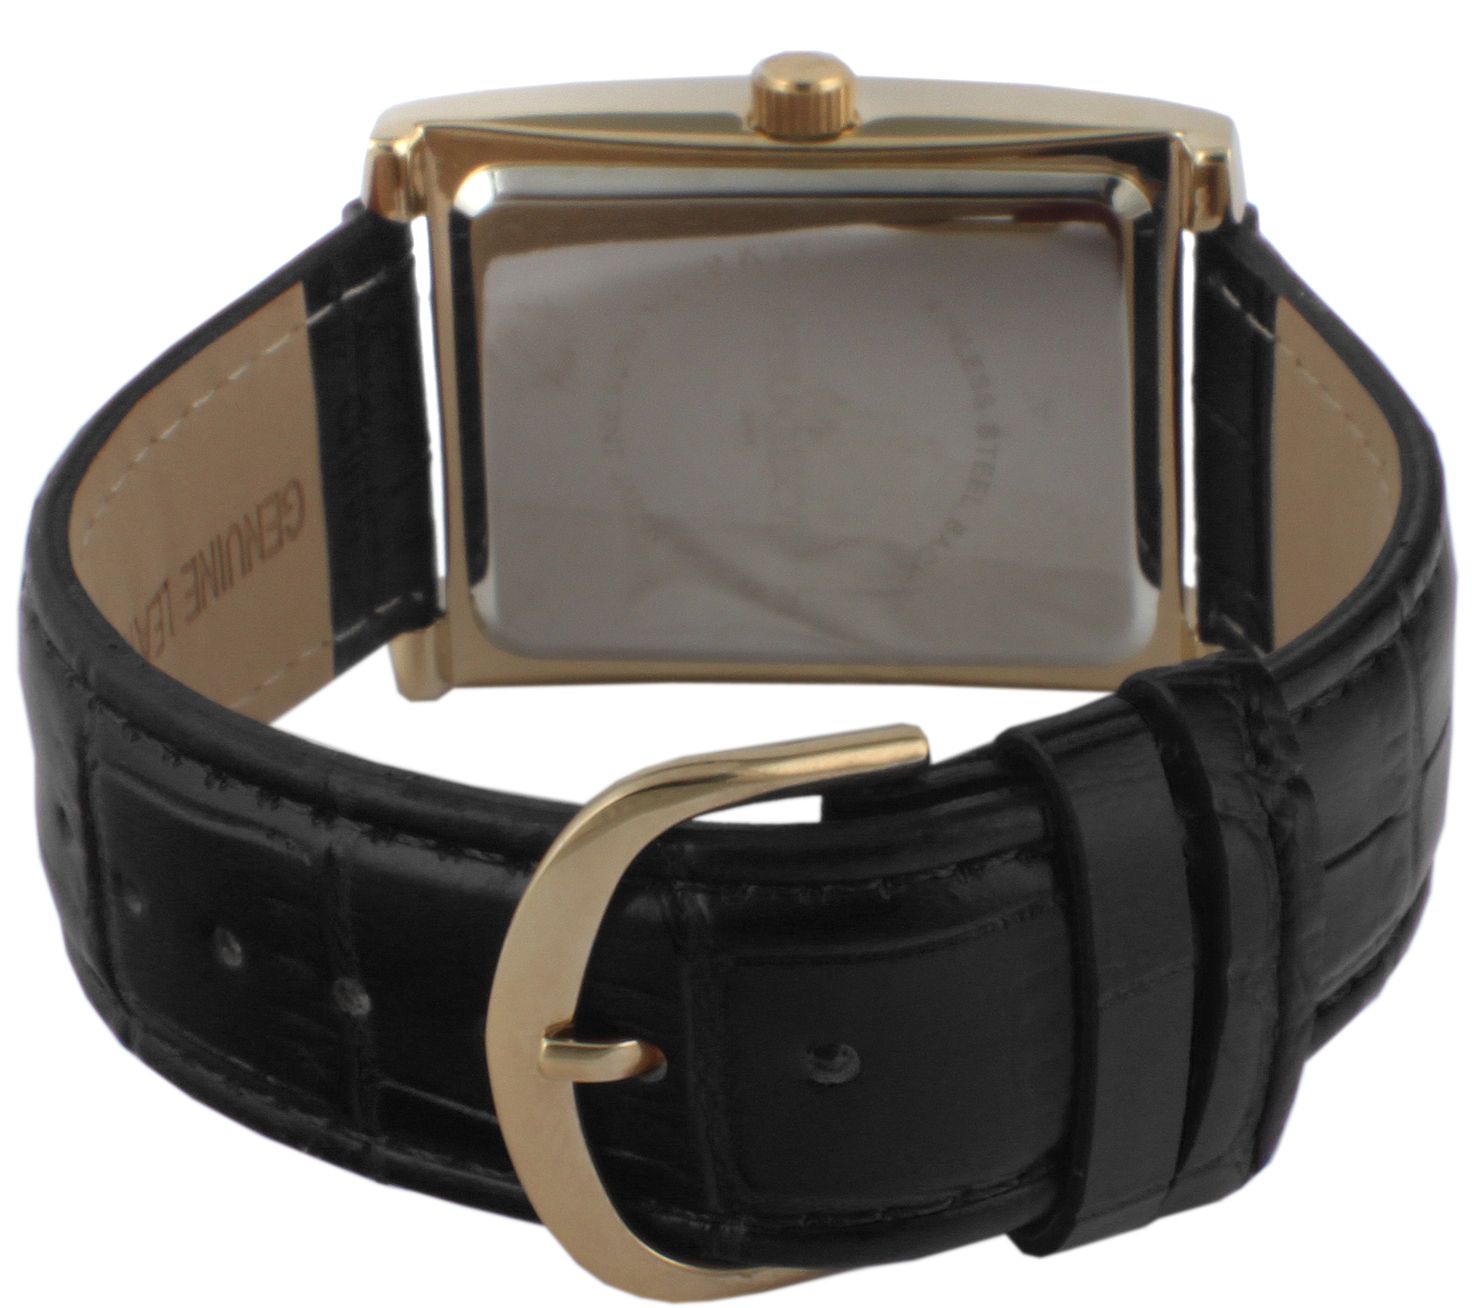 Peugeot Men's 14K-Plated Stainless RectangularLeather Watch - QVC.com